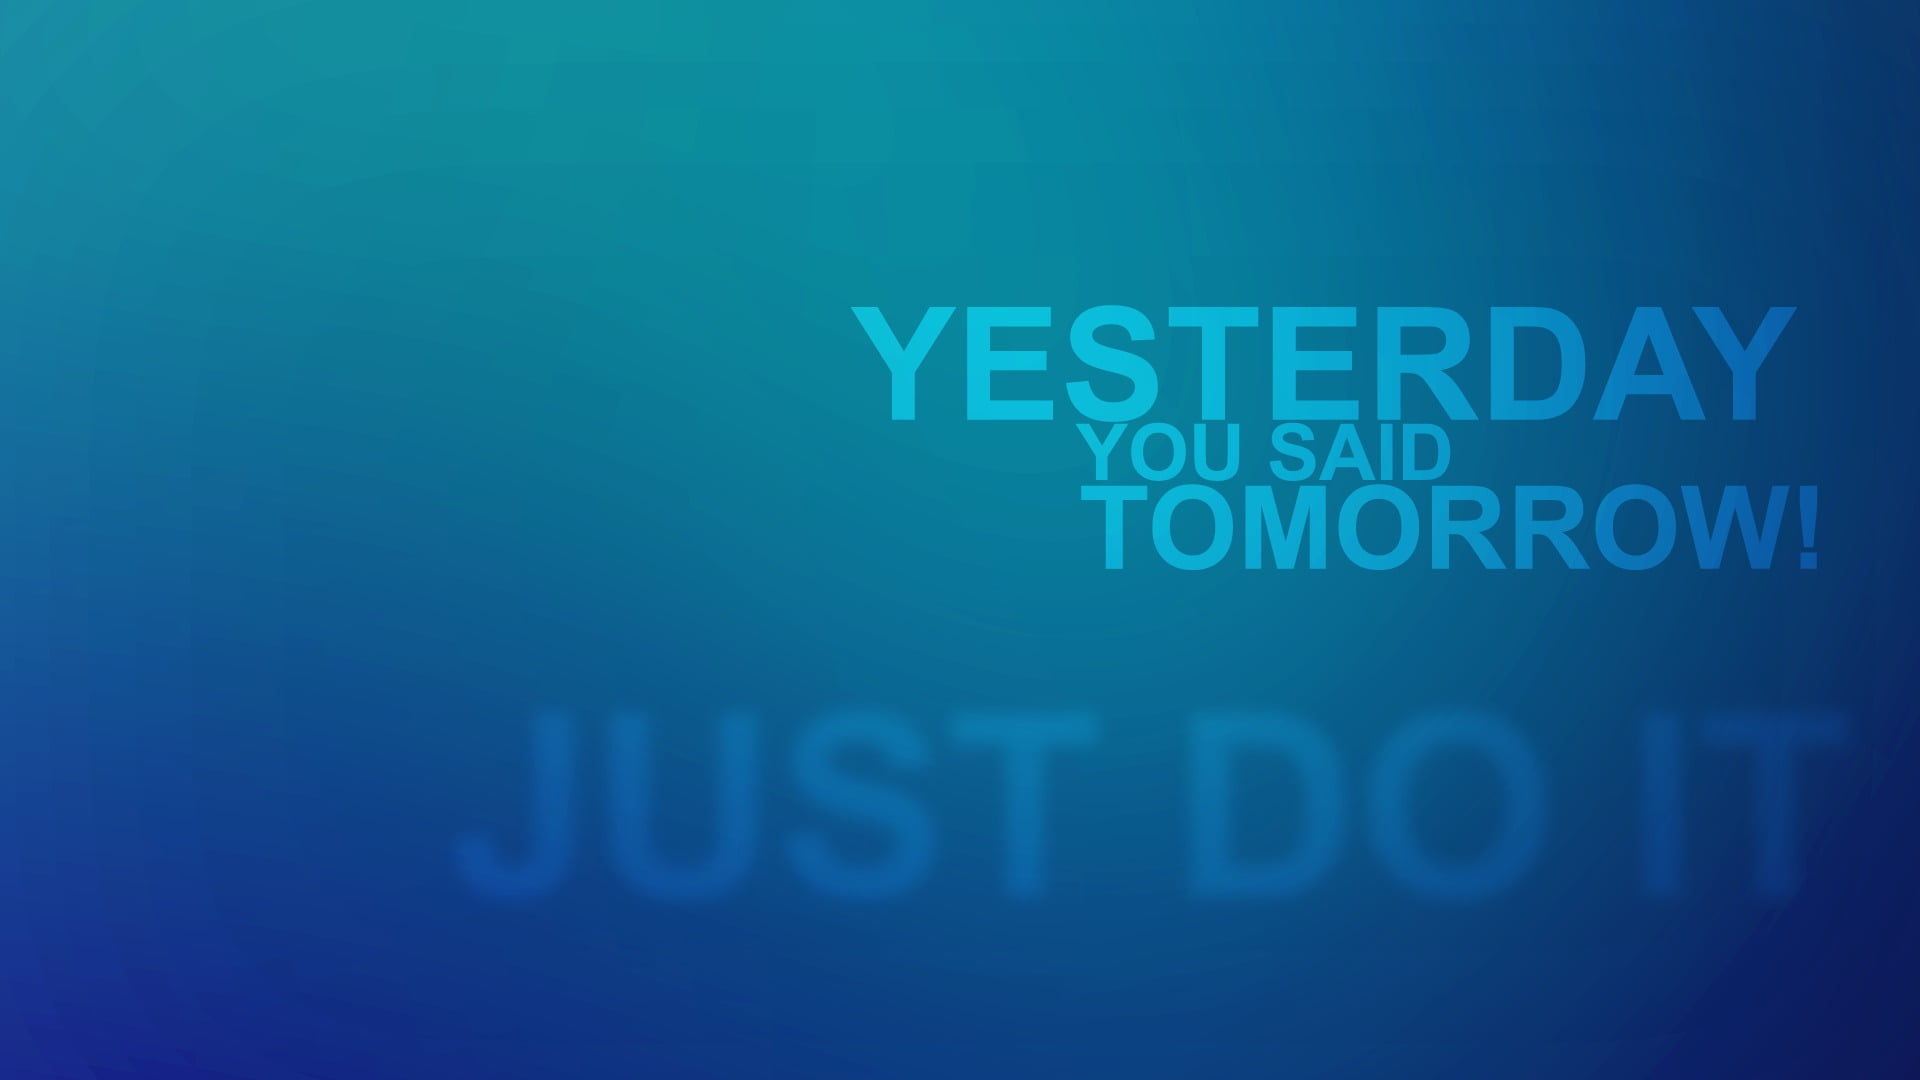 Yesterday you said tomorrow wallpaper, quote, typography, blue